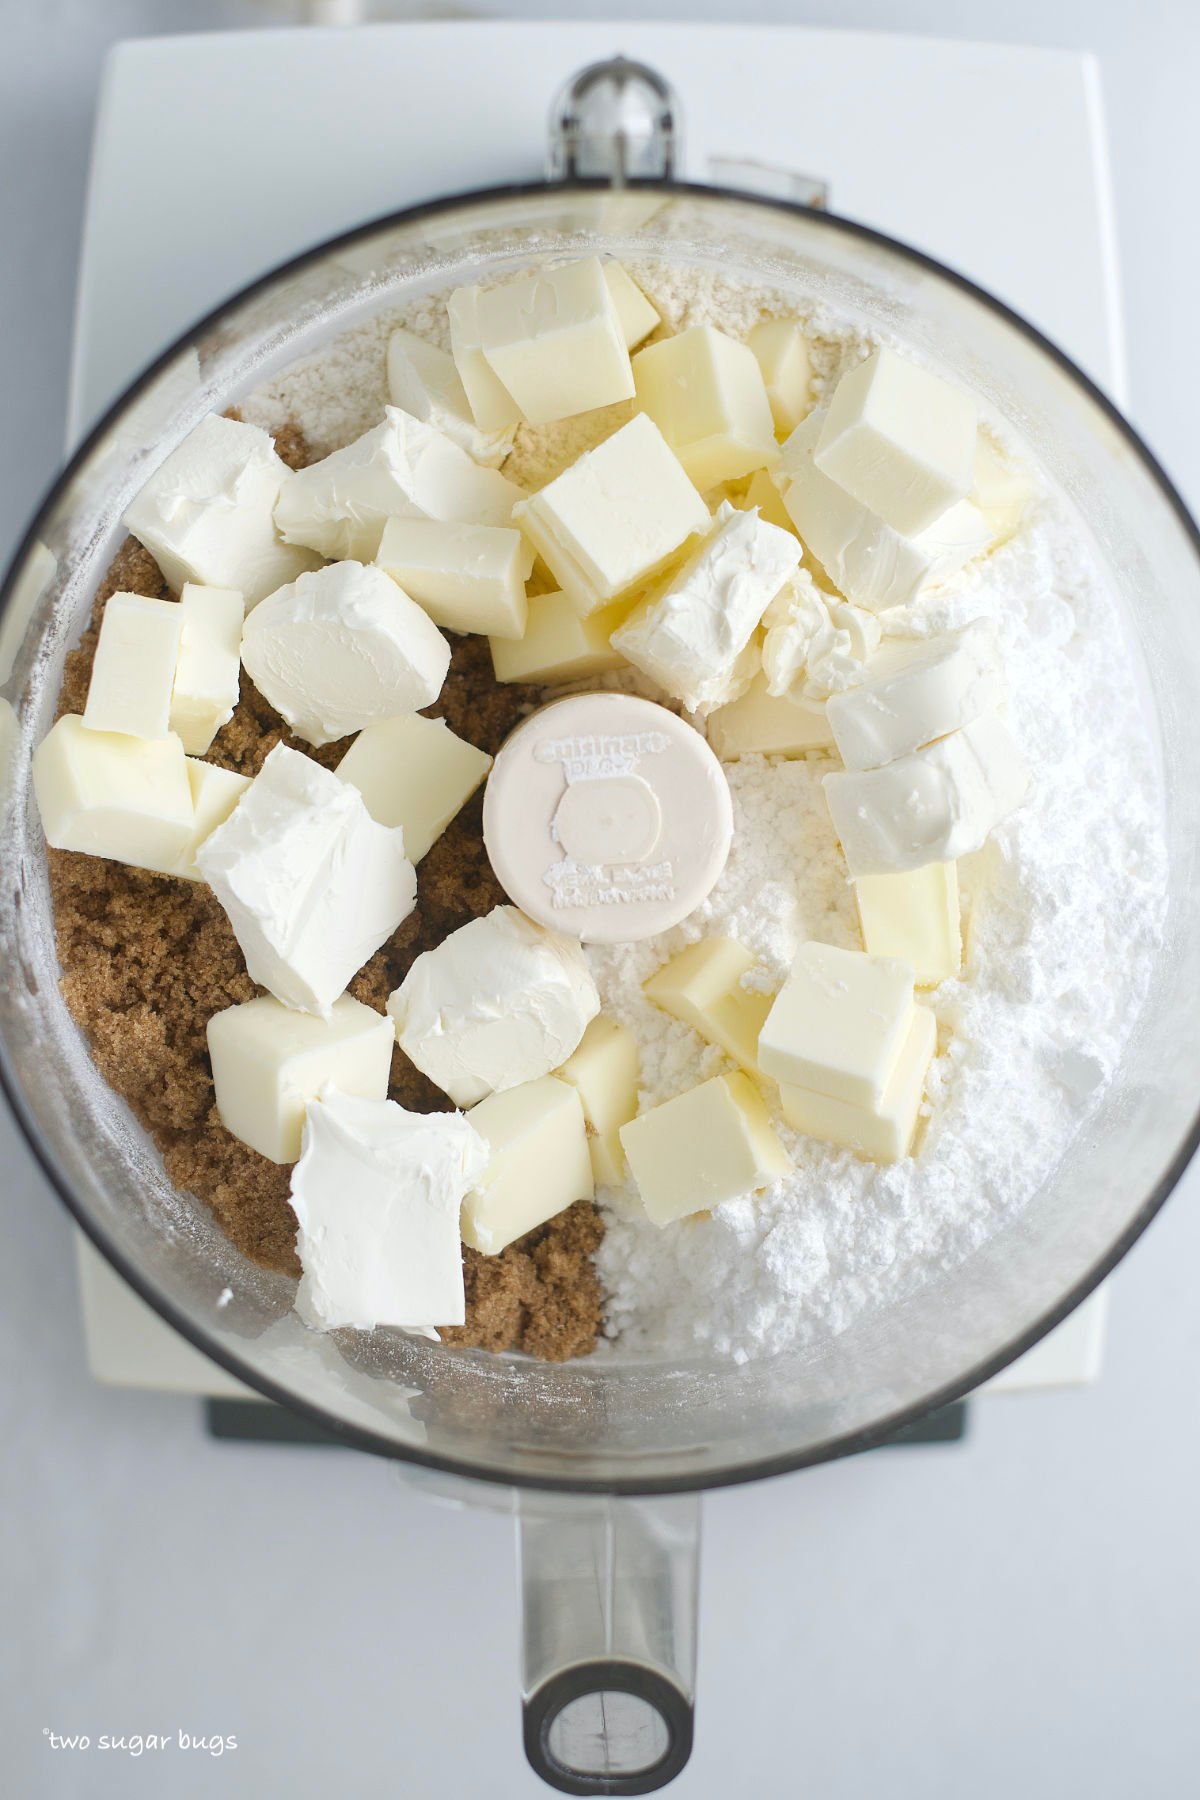 cream cheese and butter on top of sugars and flour in a food processor